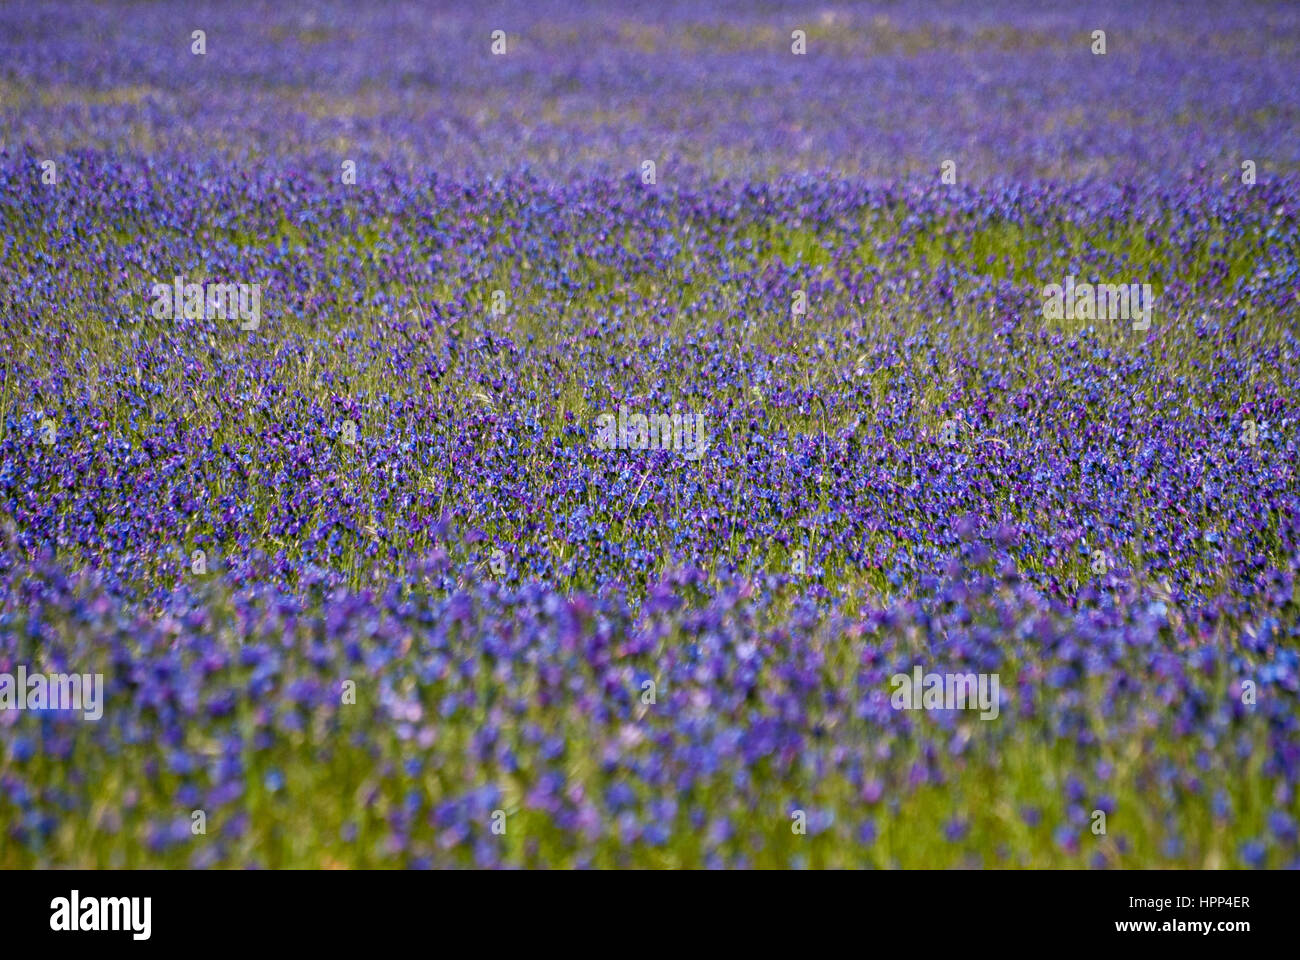 A field of Paterson's Curse, a purple flower, in a field in South Africa Stock Photo